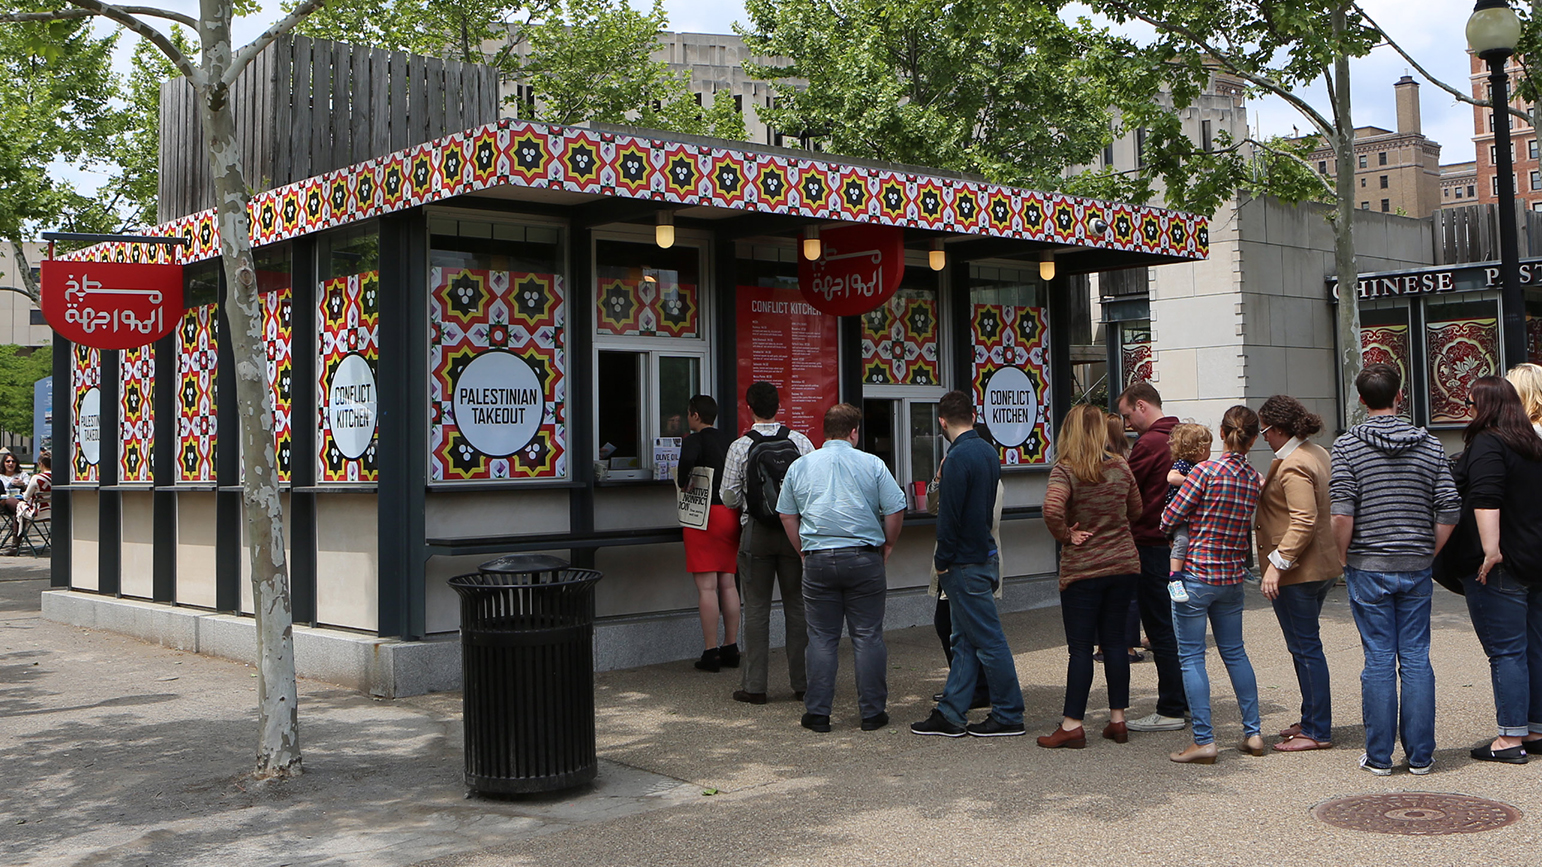 Photograph showing the exterior of the Palestinian version of Conflict Kitchen with a line of people